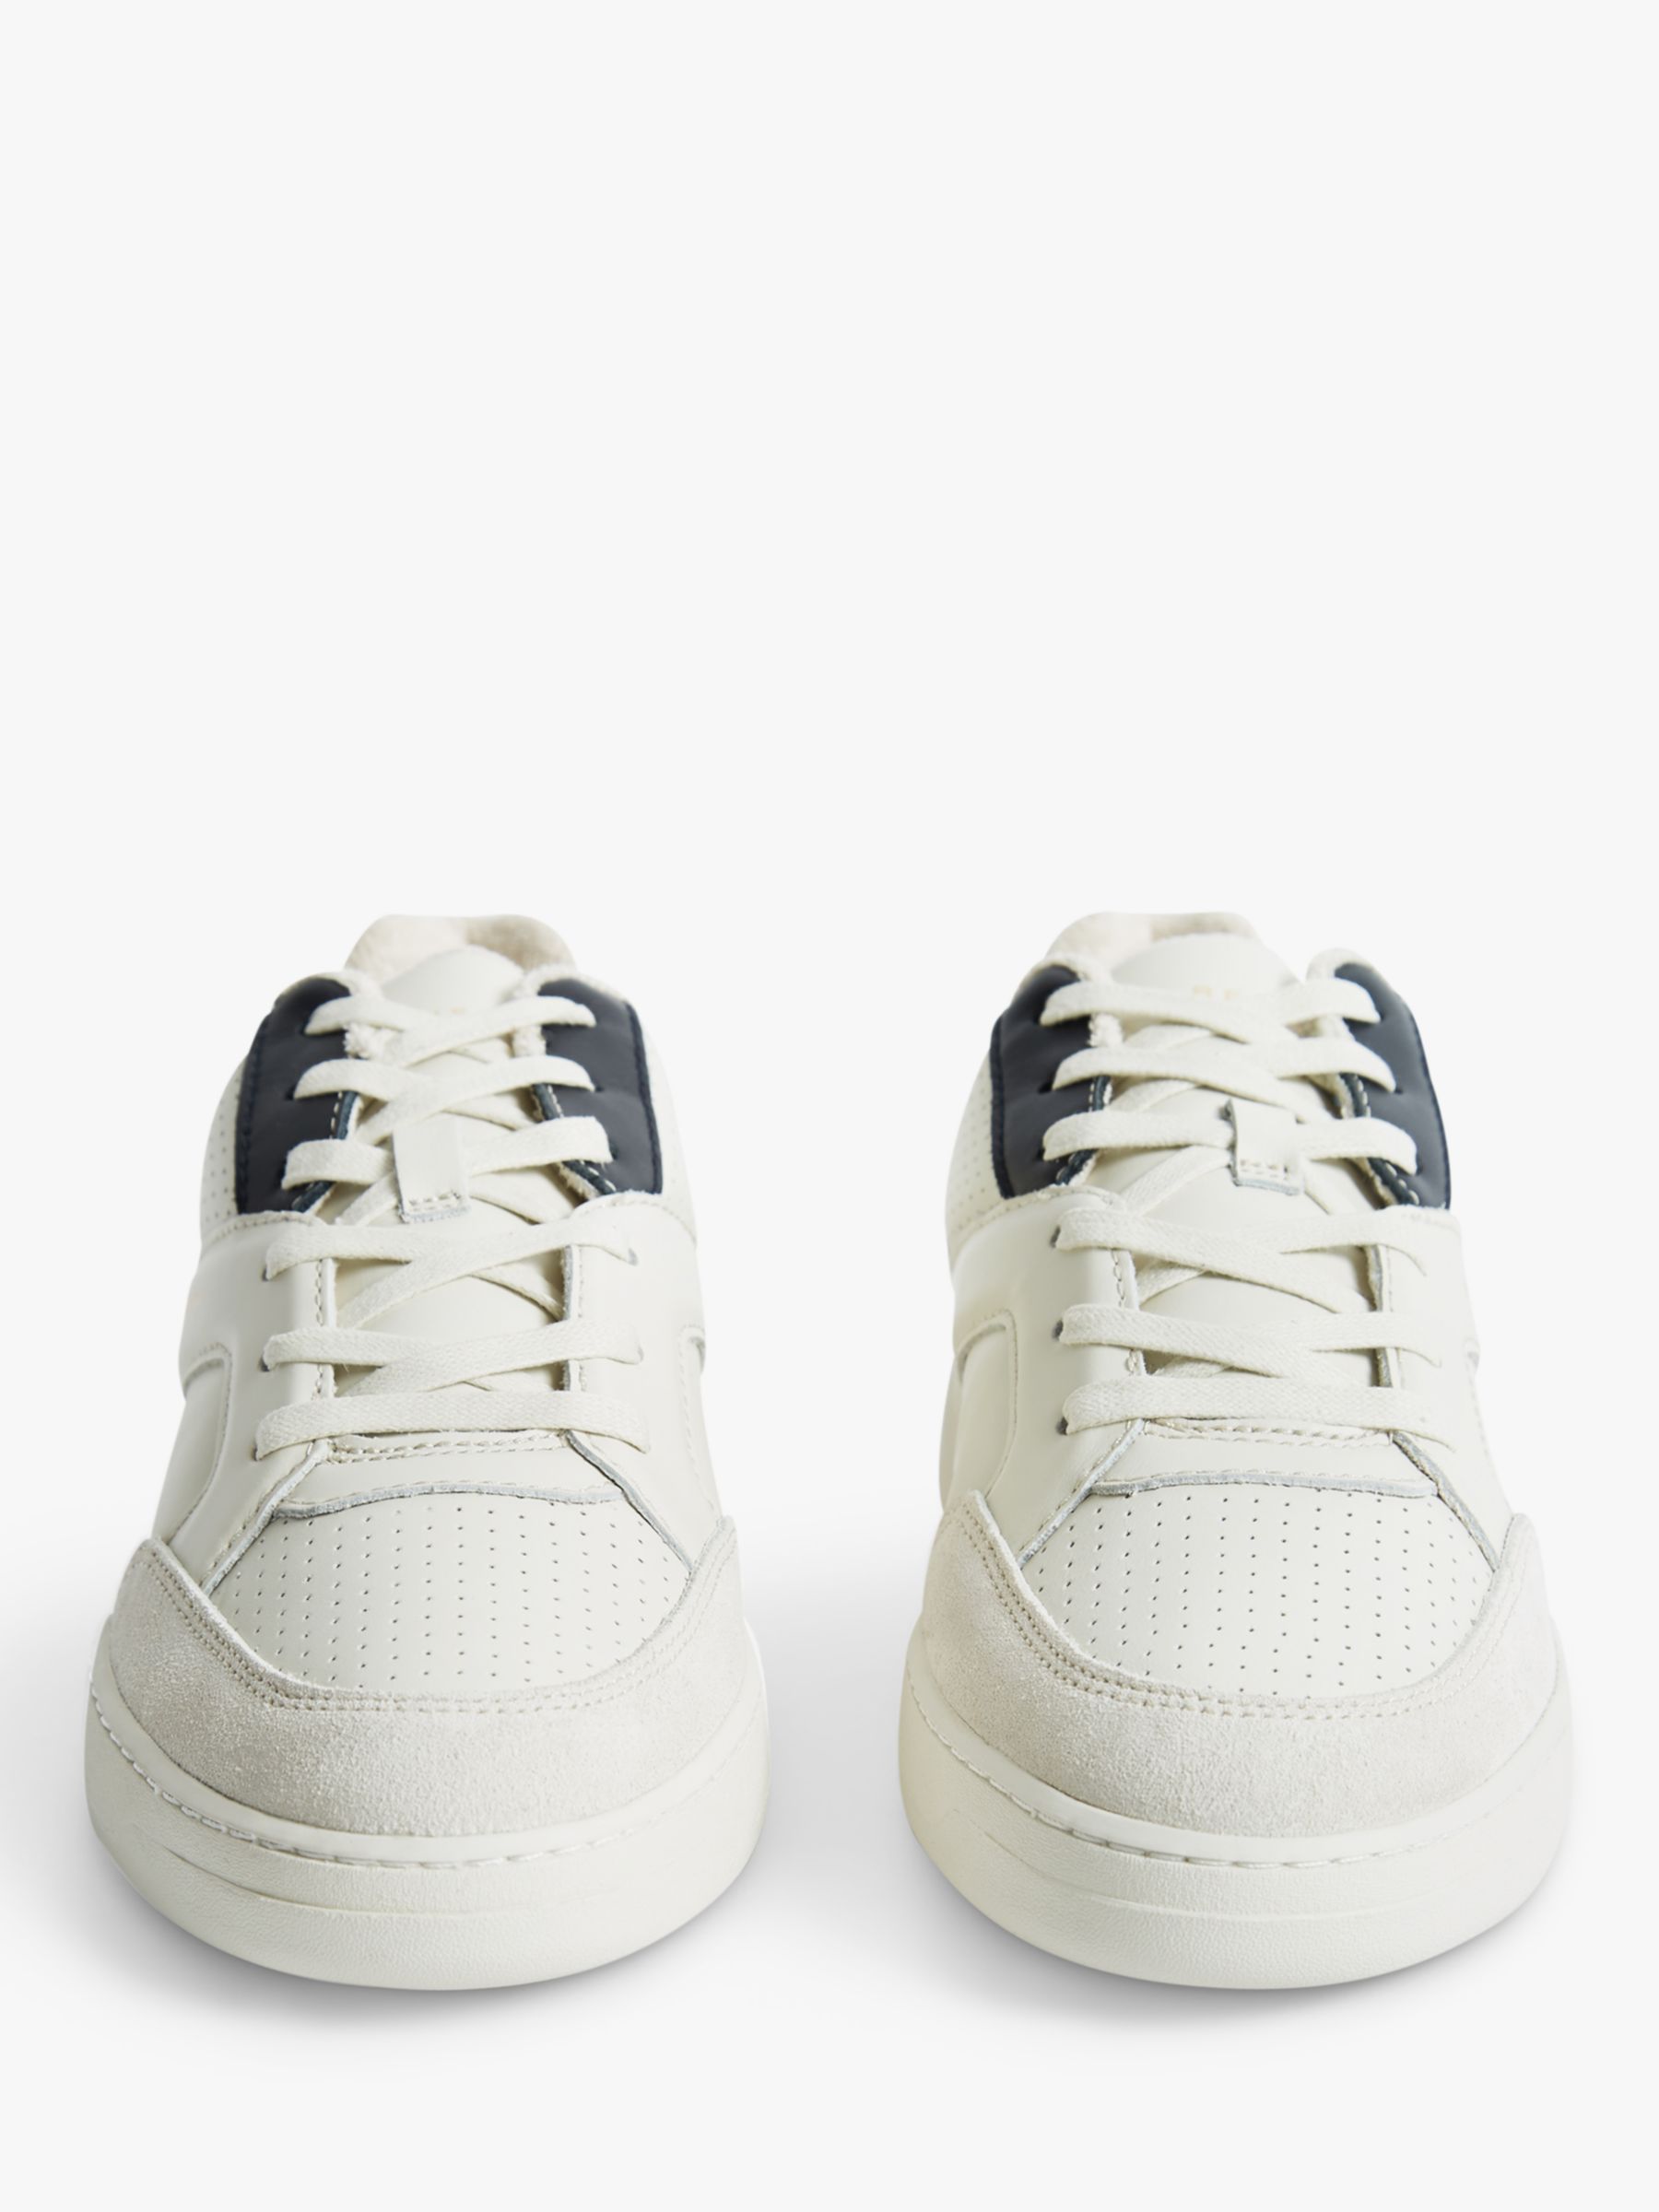 Reiss Grendon Leather Perforated Trainers, White/Multi